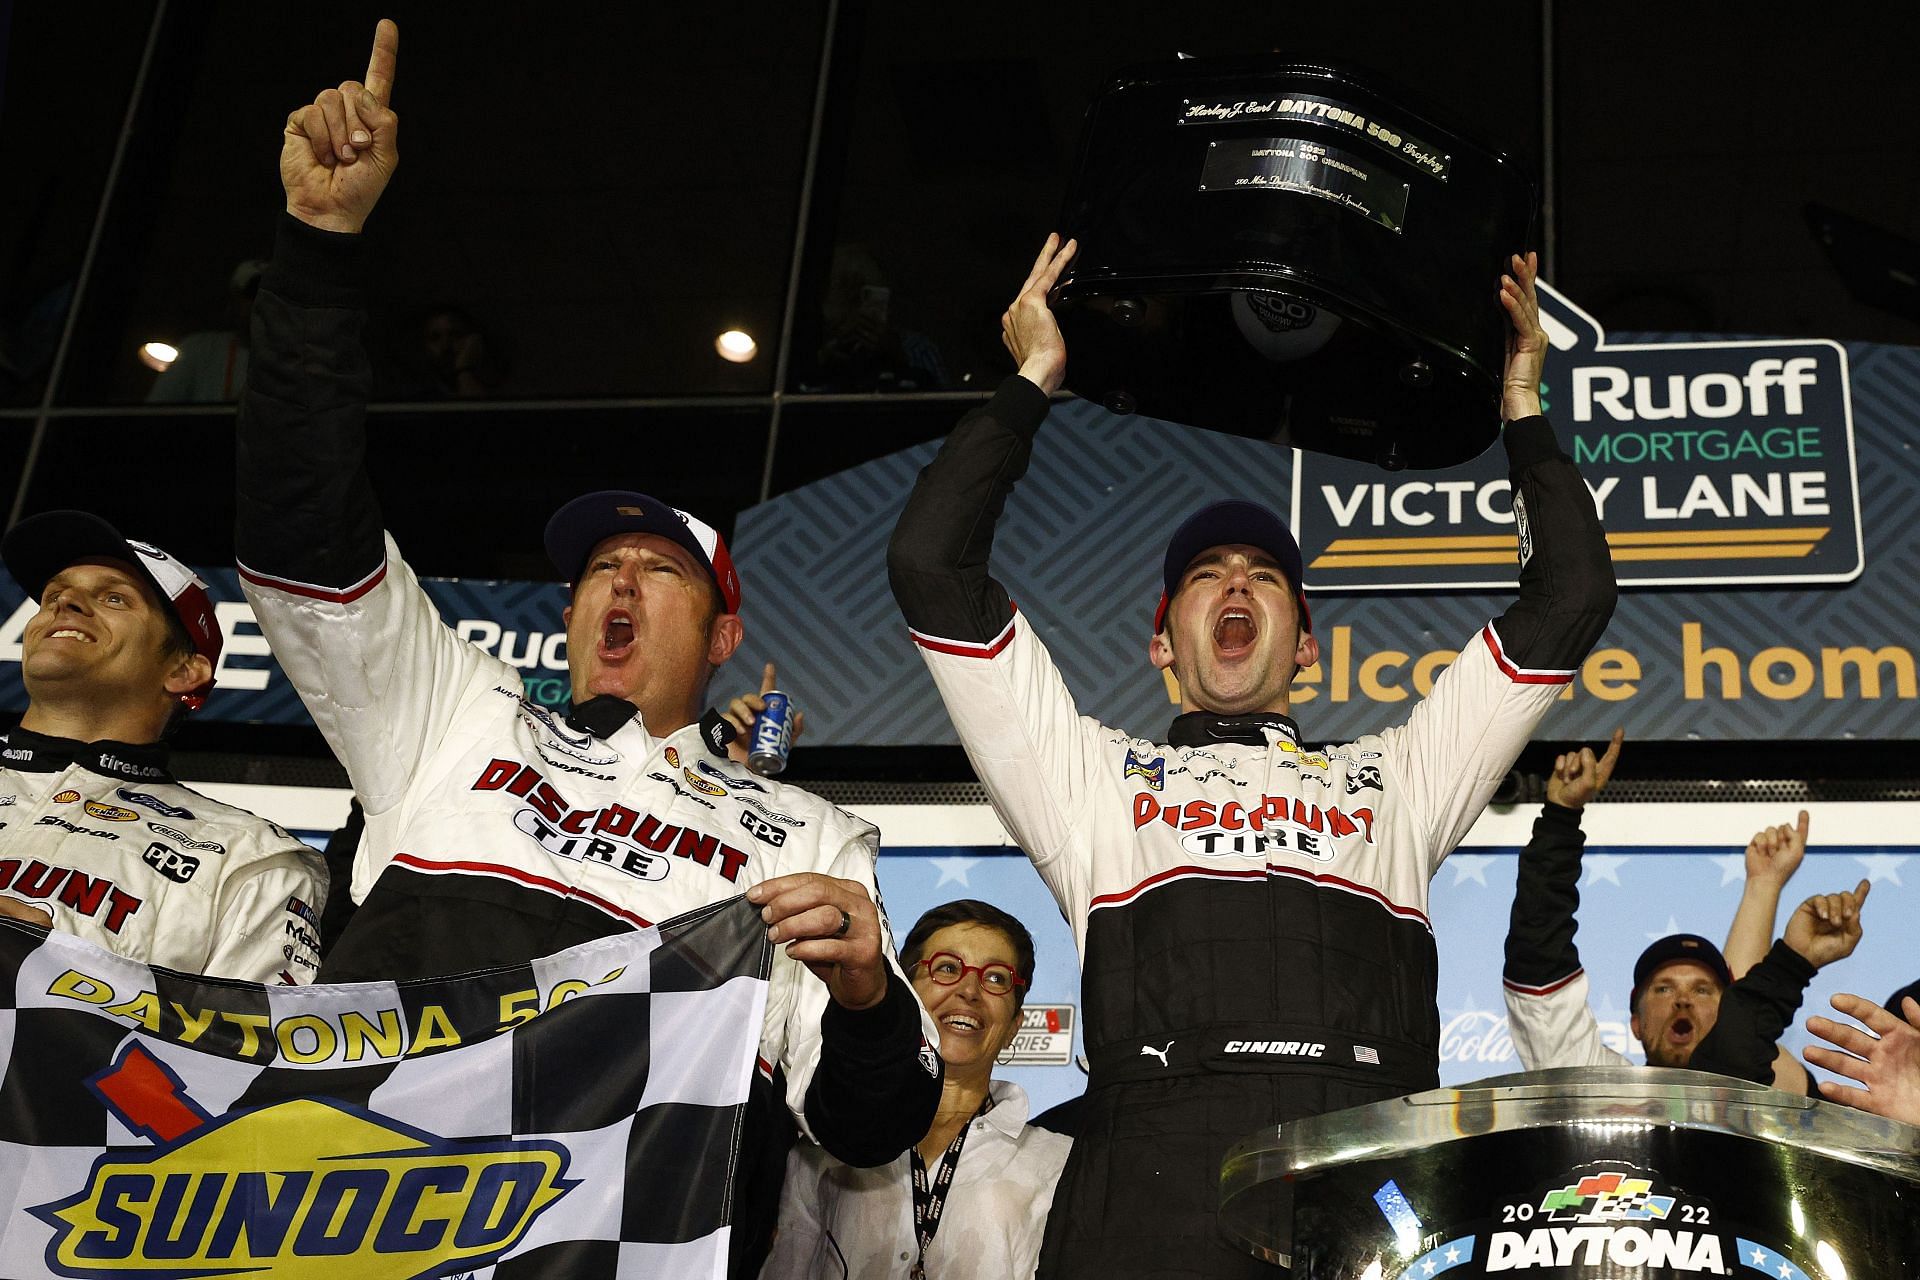 Austin Cindric and Team Penske celebrate after winning the 2022 Daytona 500 (Photo by Jared C. Tilton/Getty Images)